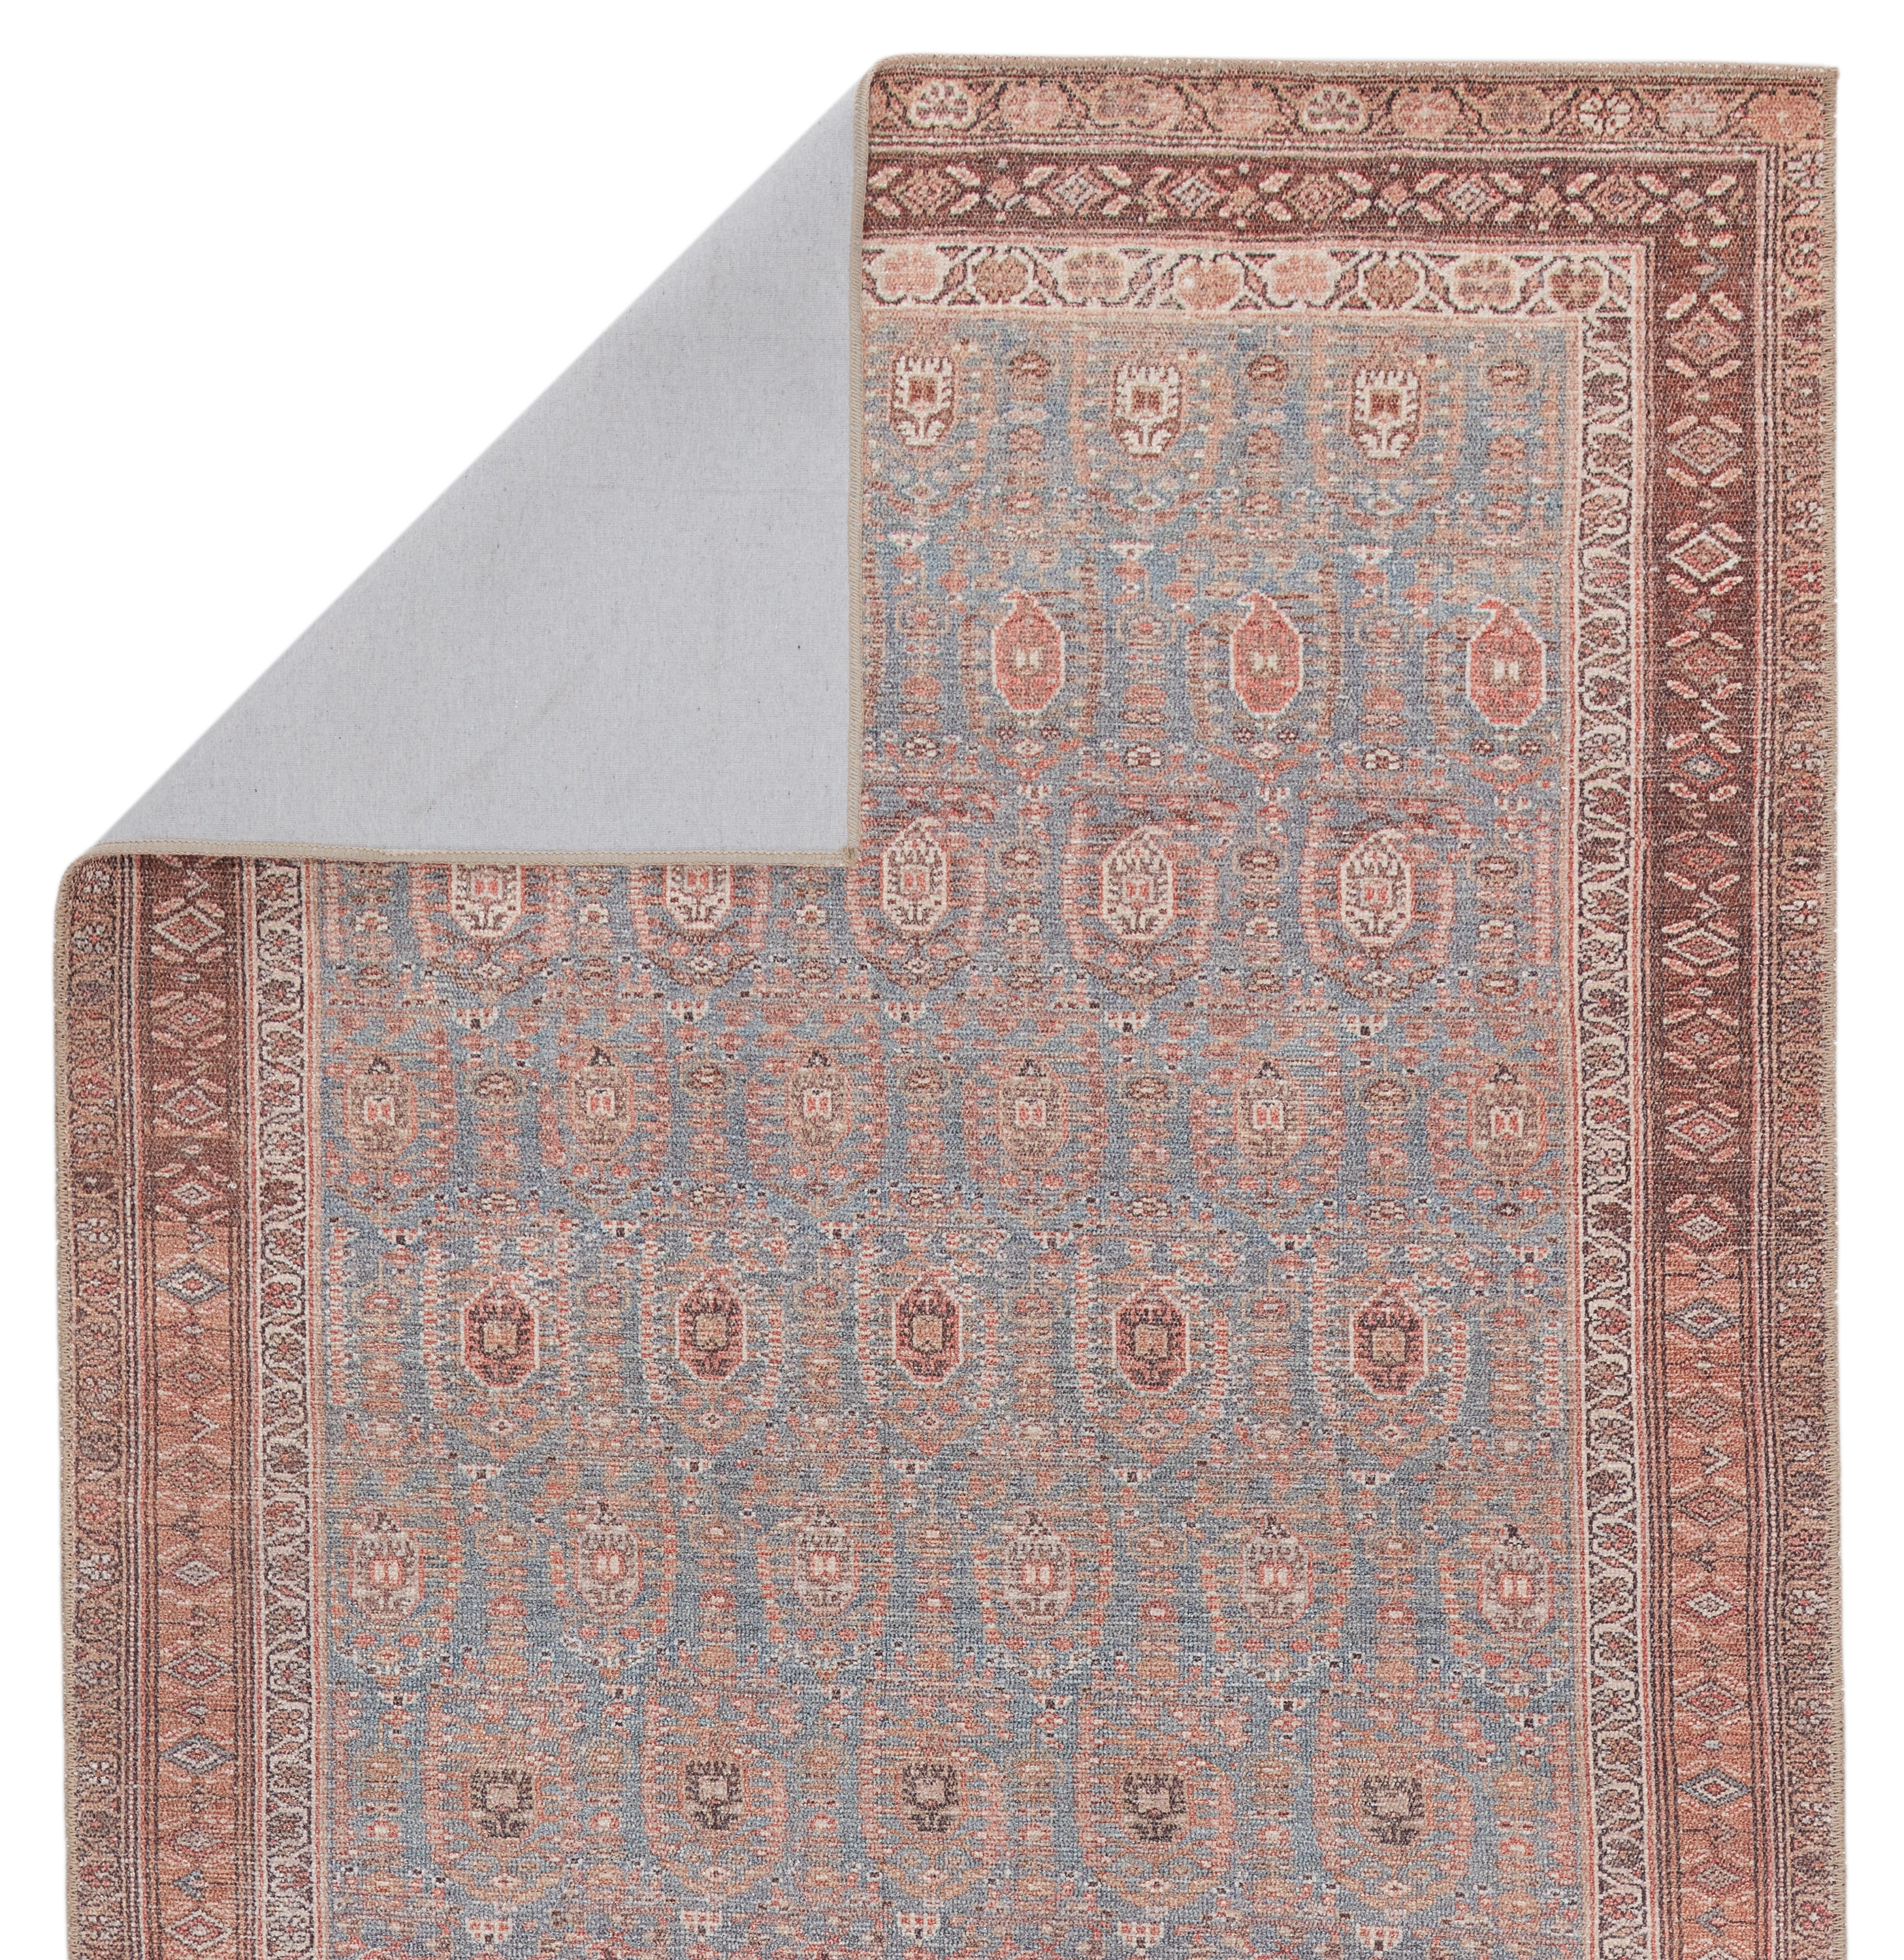 Vibe by Tielo Oriental Area Rug, Blue & Brown, 5 ' x 7'6" - Image 2